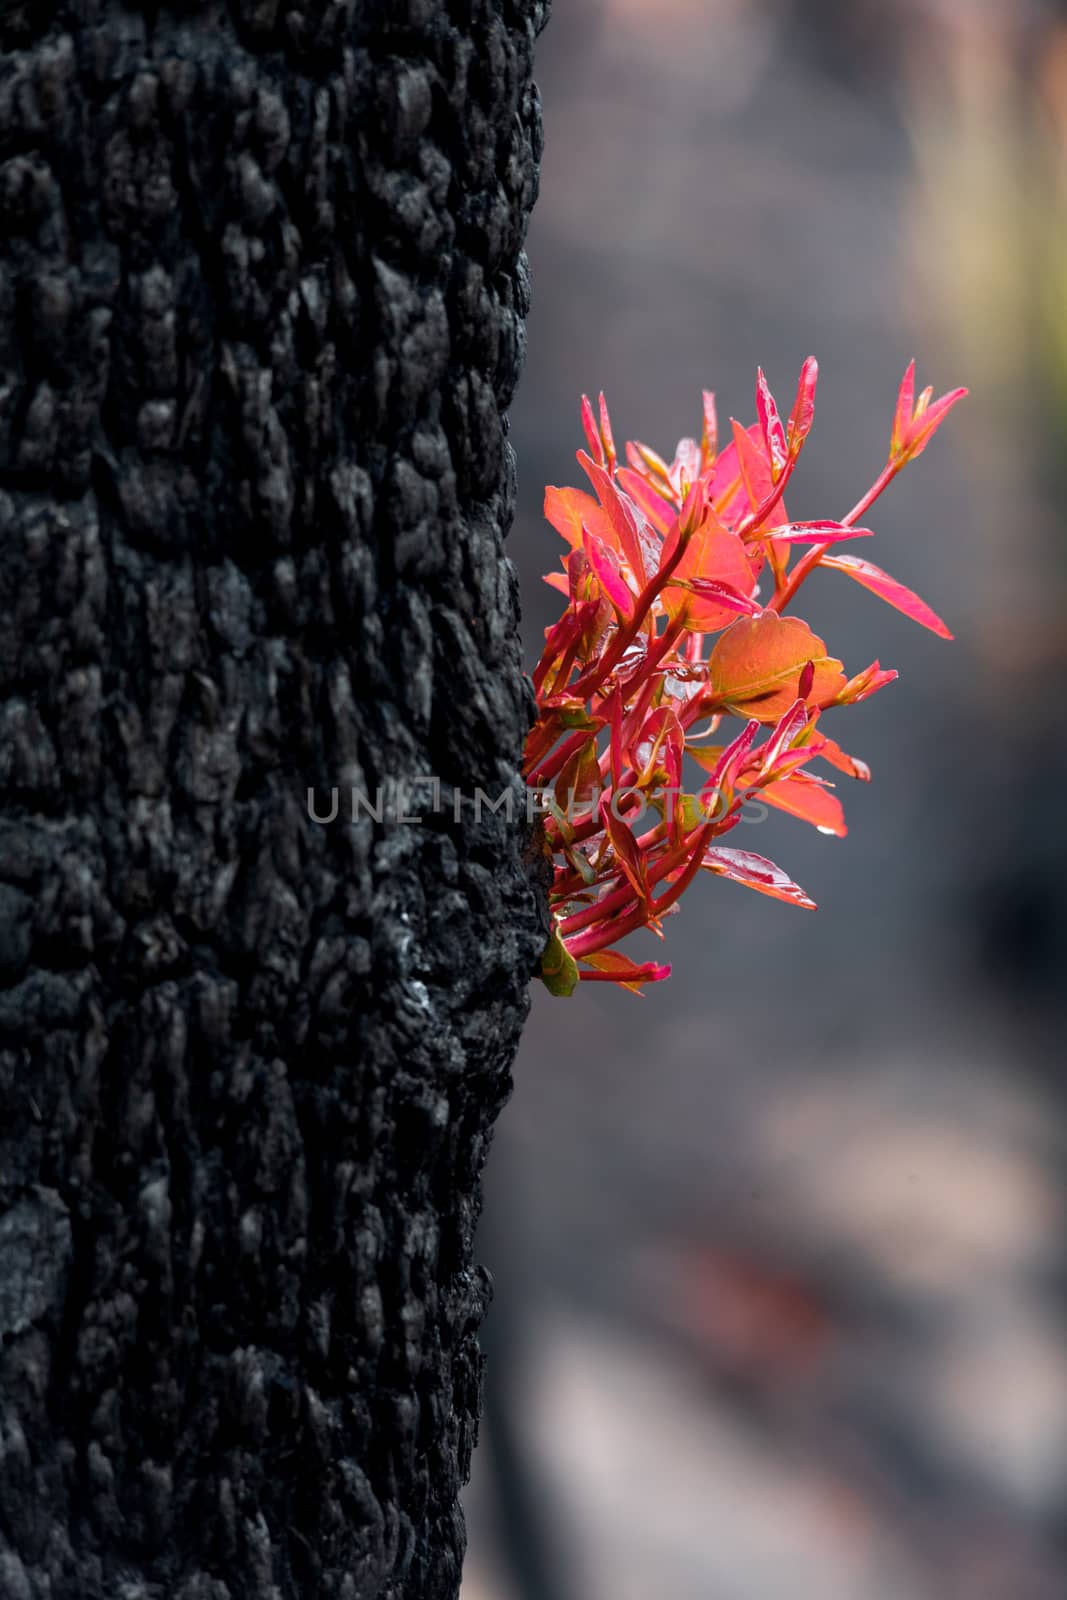 Trees burst forth with fresh new leaves after bush fire by lovleah